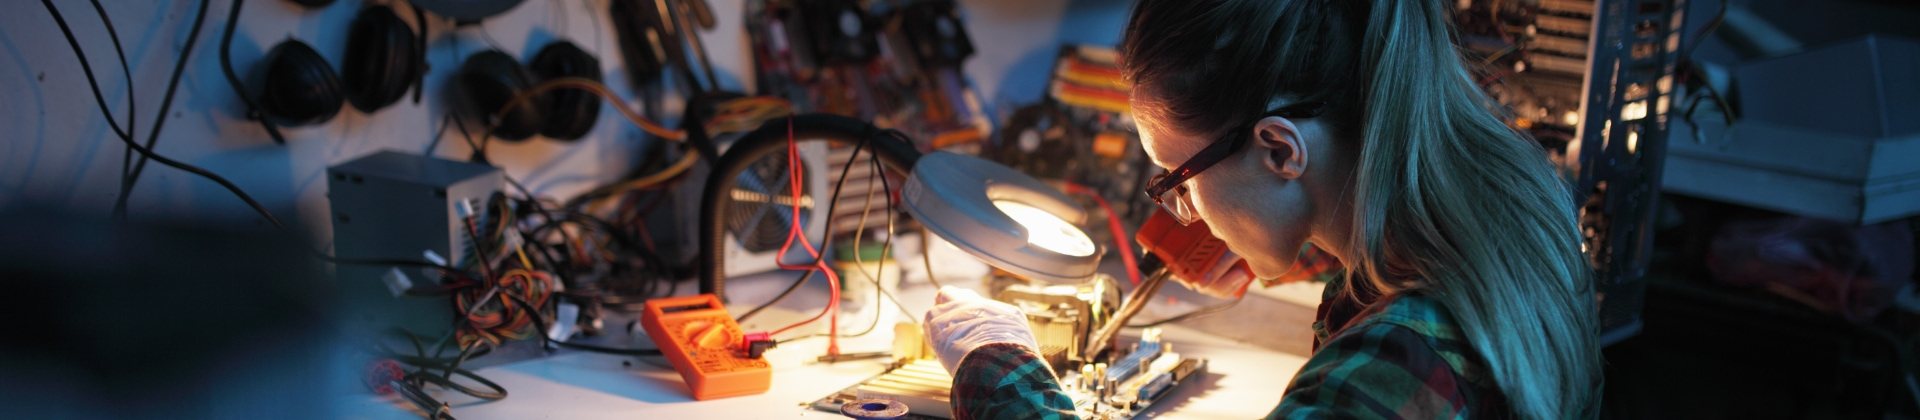 Person soldering electronics